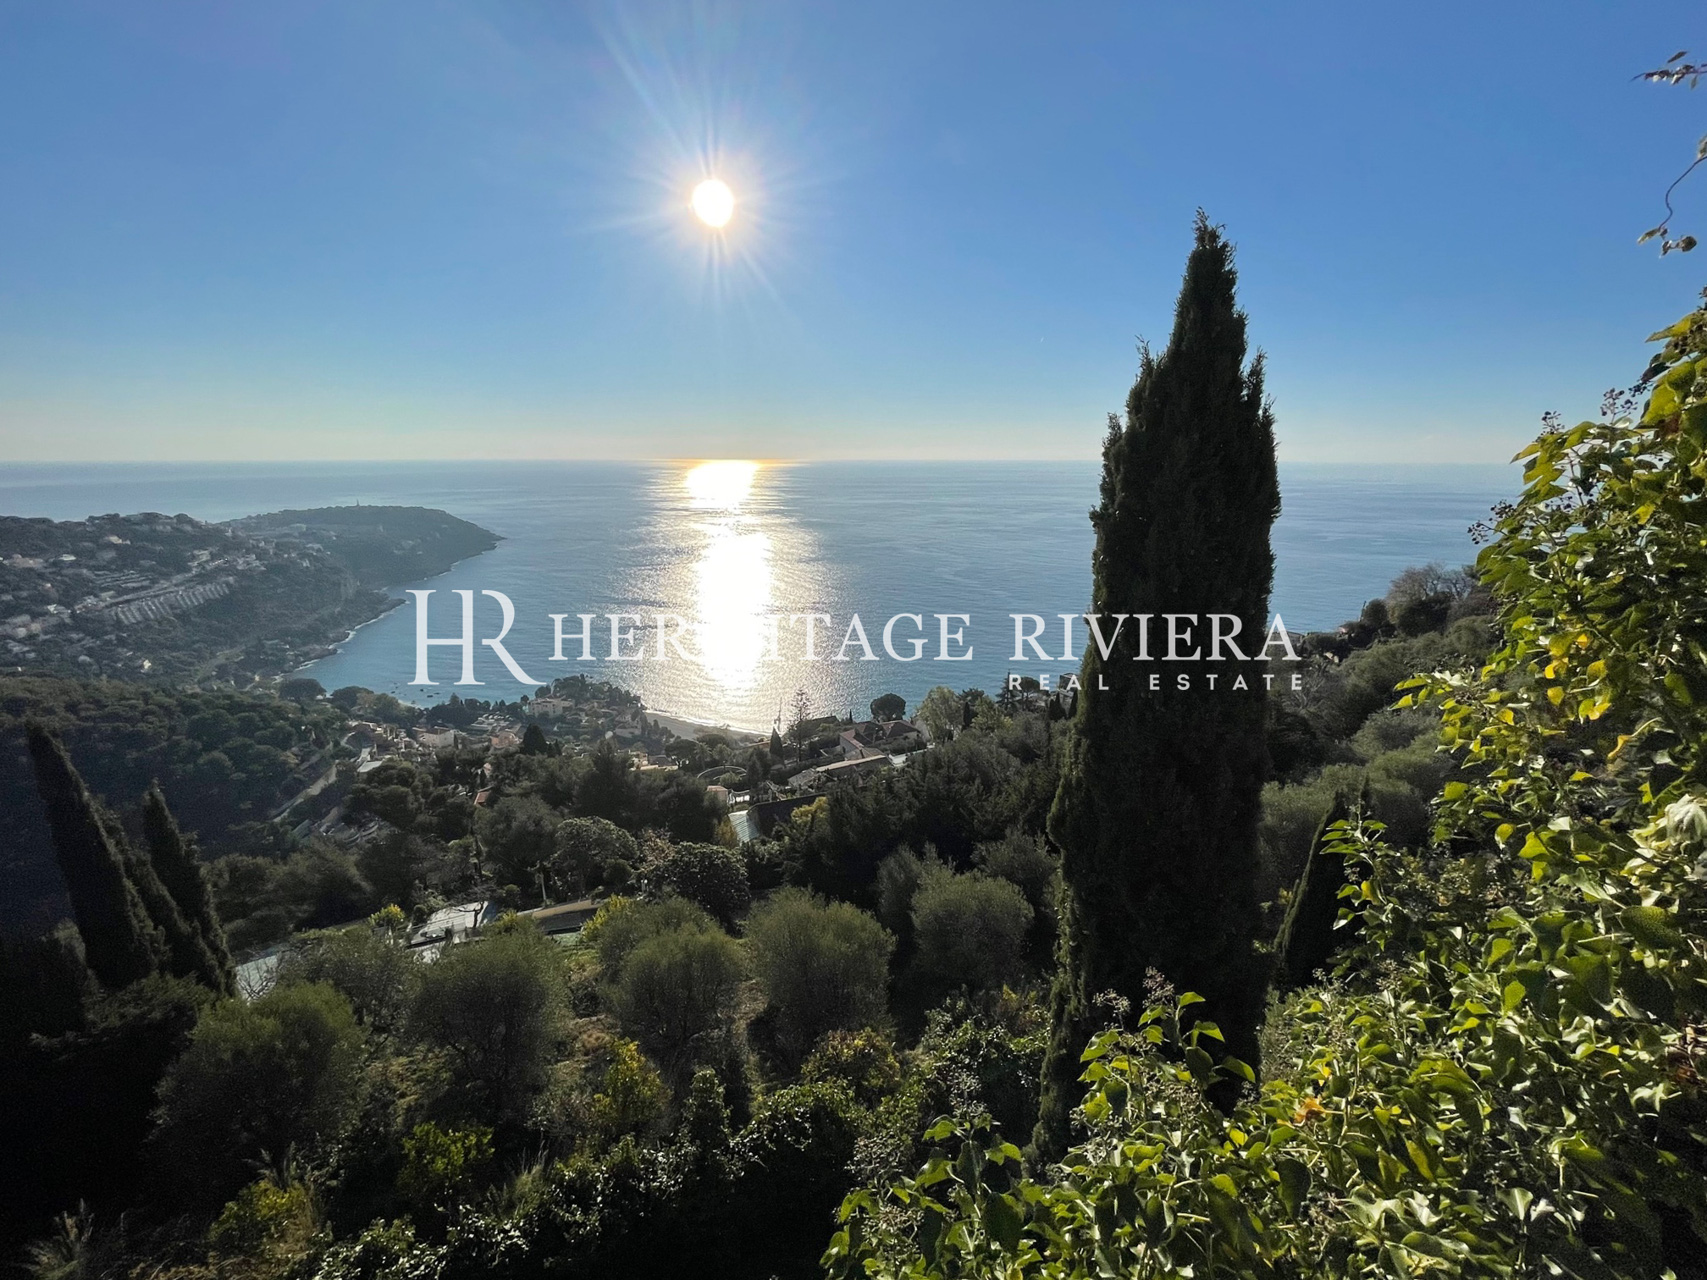 Property close Monaco with panoramic view  (image 5)